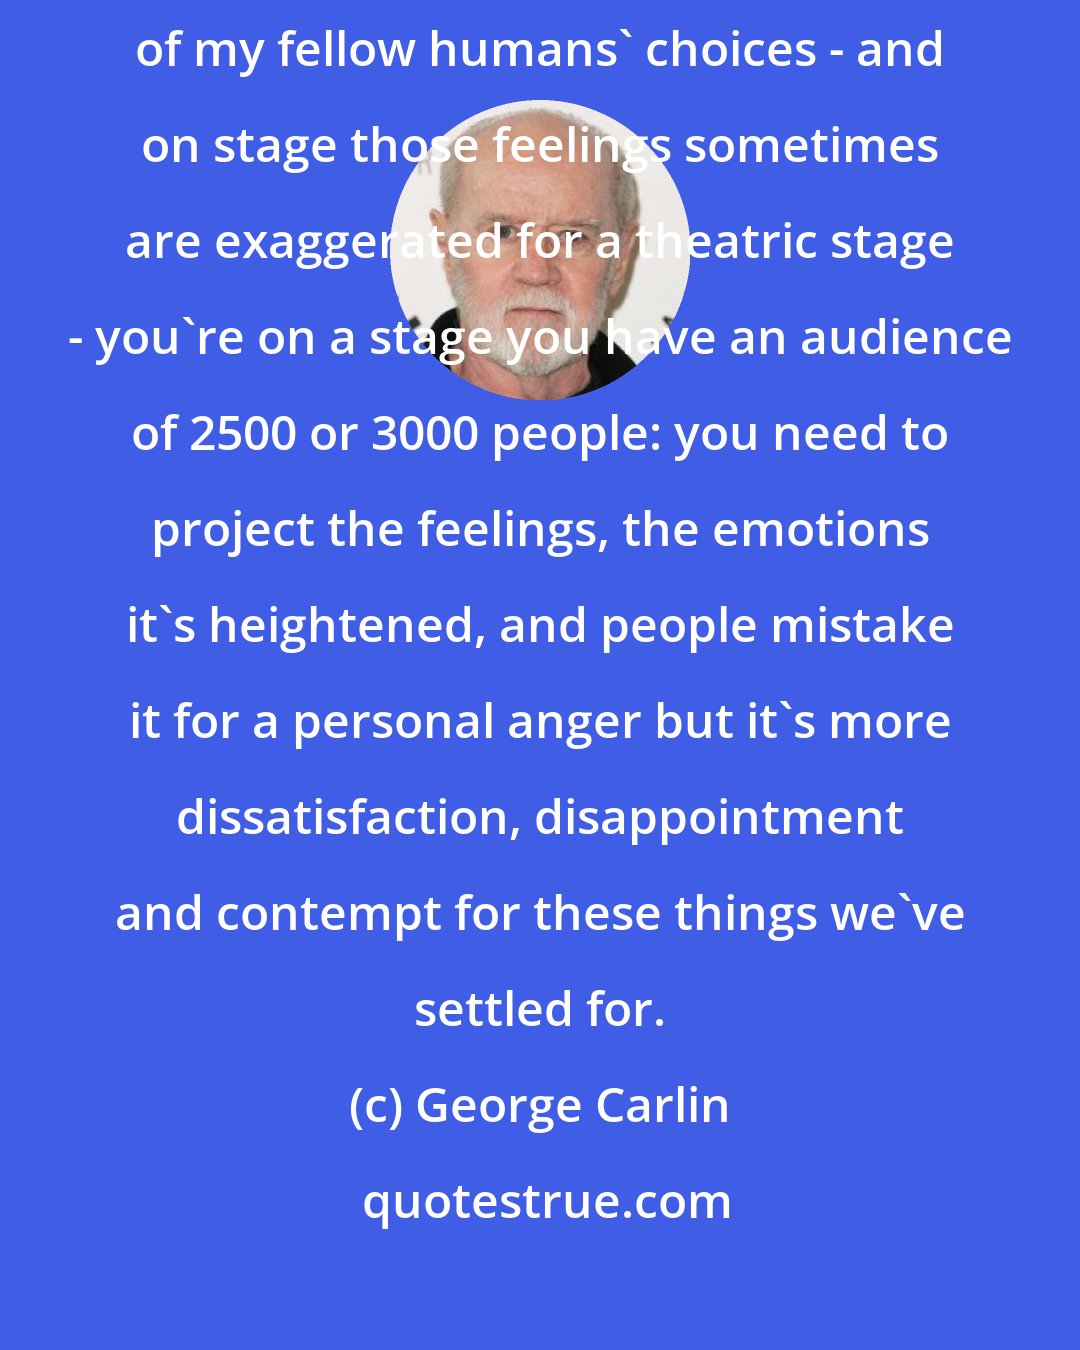 George Carlin: I'm not an angry person, just very disappointed and contemptuous of my fellow humans' choices - and on stage those feelings sometimes are exaggerated for a theatric stage - you're on a stage you have an audience of 2500 or 3000 people: you need to project the feelings, the emotions it's heightened, and people mistake it for a personal anger but it's more dissatisfaction, disappointment and contempt for these things we've settled for.